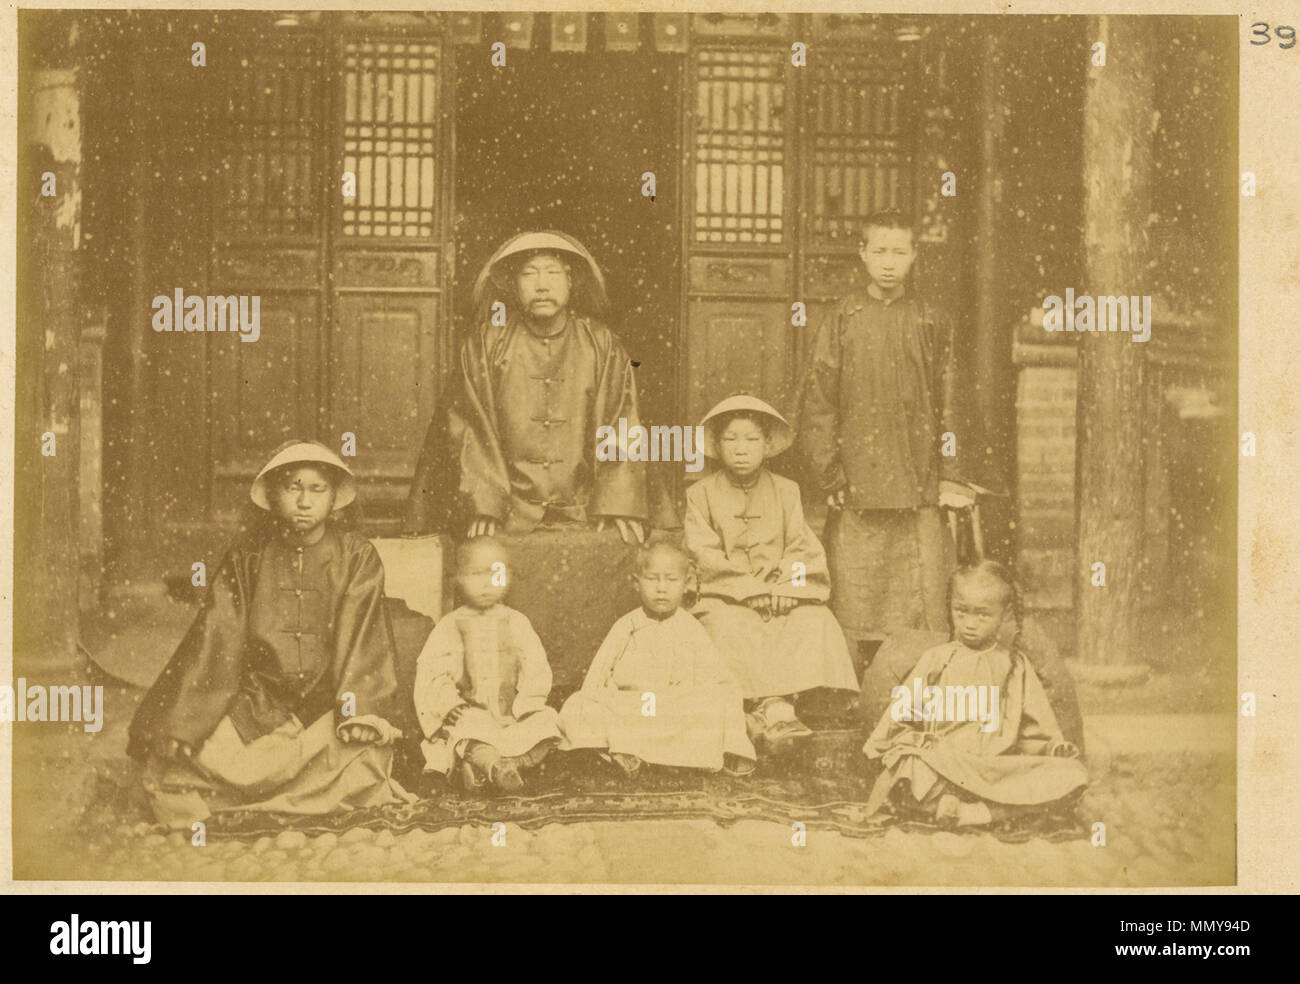 A Scholar’s Family. His Wife Is Not Present, for Strict Confucian Families Did Not Allow Women Out of Their Homes. China, 1874-75 WDL1931 Stock Photo